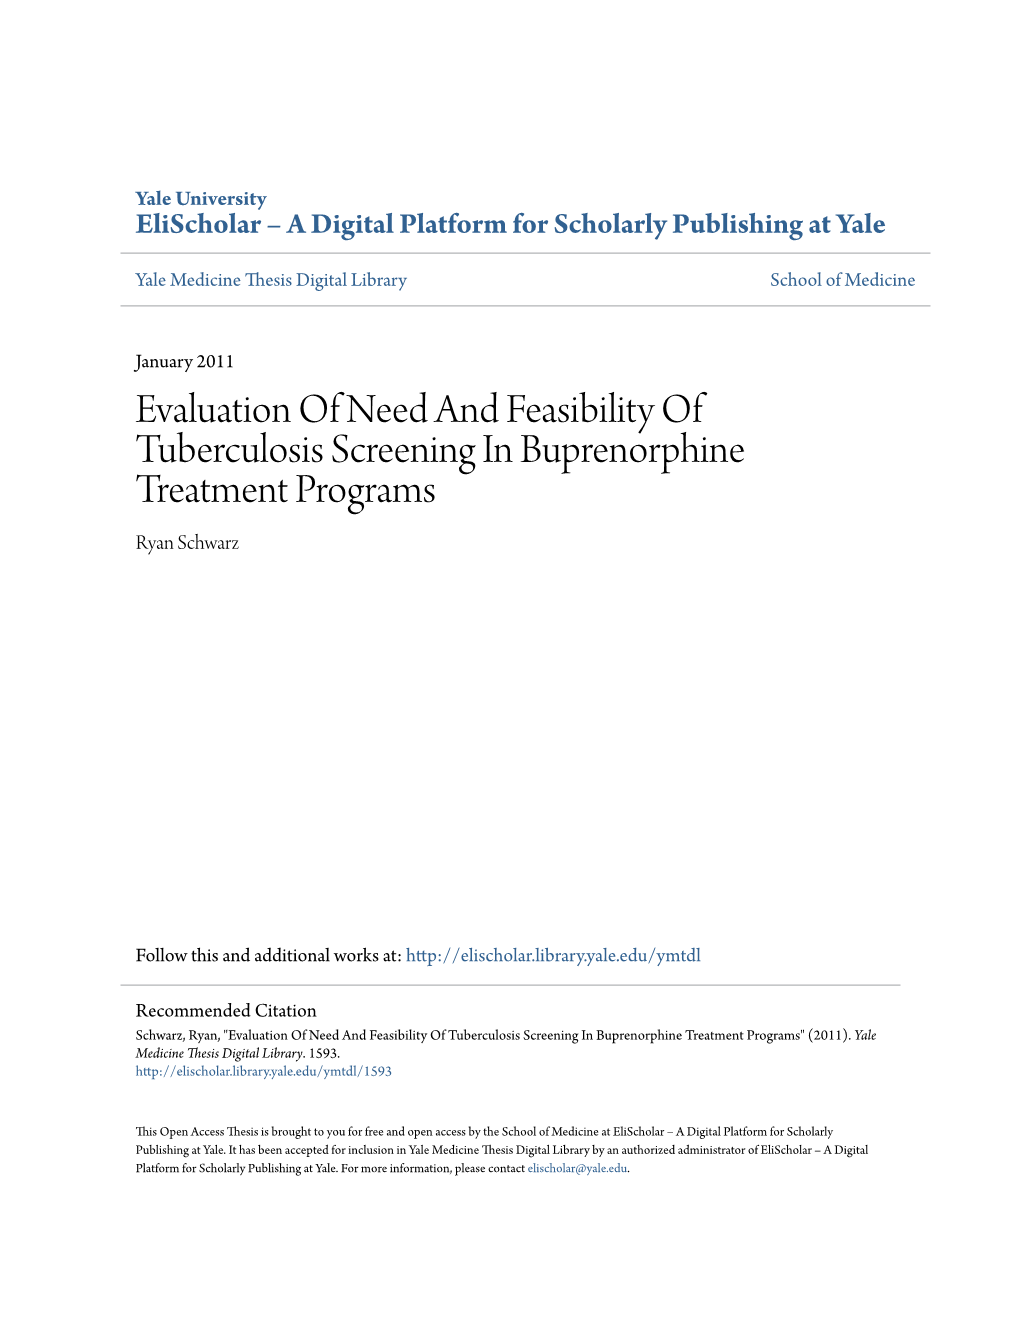 Evaluation of Need and Feasibility of Tuberculosis Screening in Buprenorphine Treatment Programs Ryan Schwarz